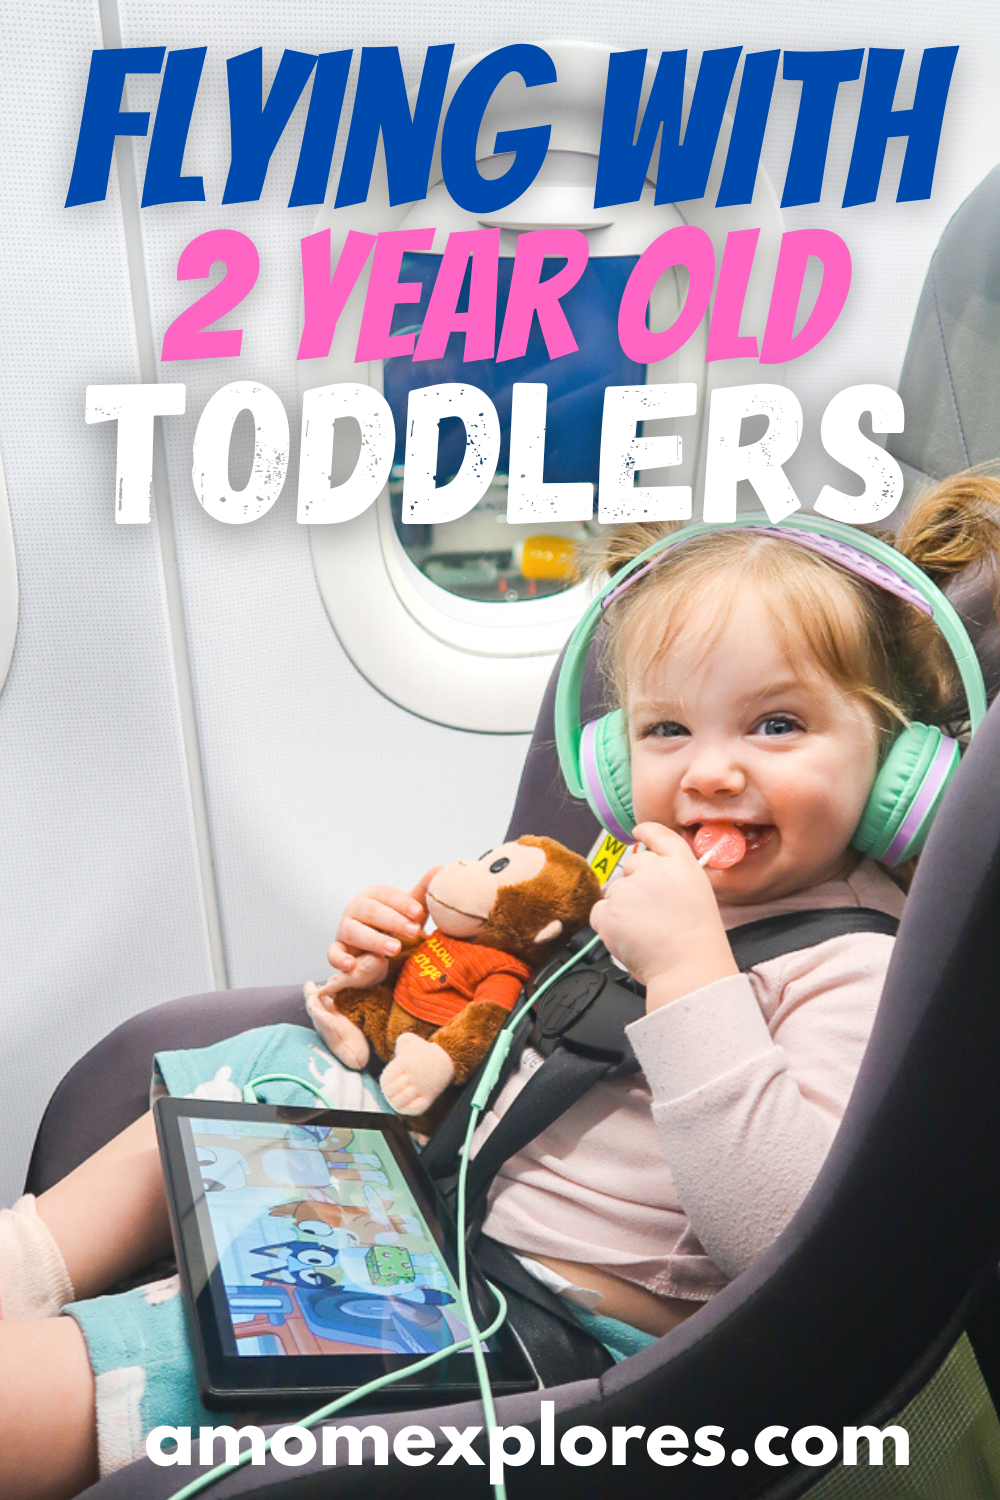 Flying with 2 Year Old Toddler Tips - How to Travel with Toddlers on A Mom Explores Family Travel blog. Travel with Kids can be tough so here is how to travel with 2 year old toddlers..png